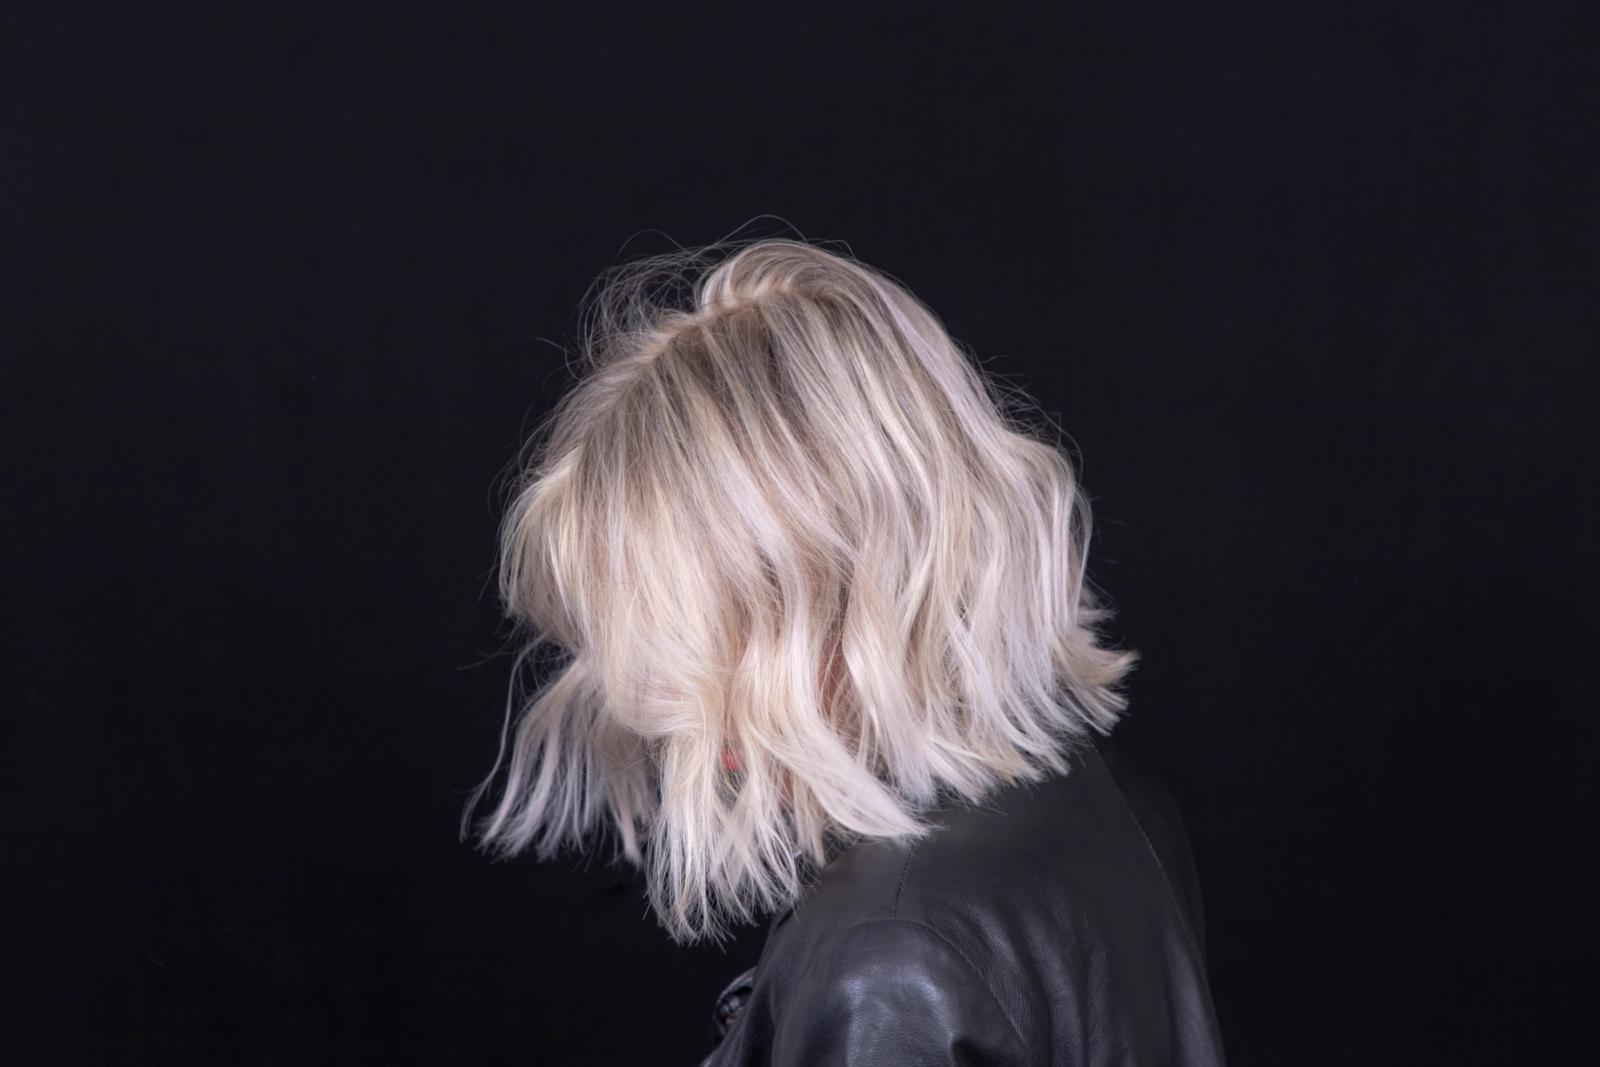 Woman with short platinum blonde hair fencing to the side while looking down with a black background.